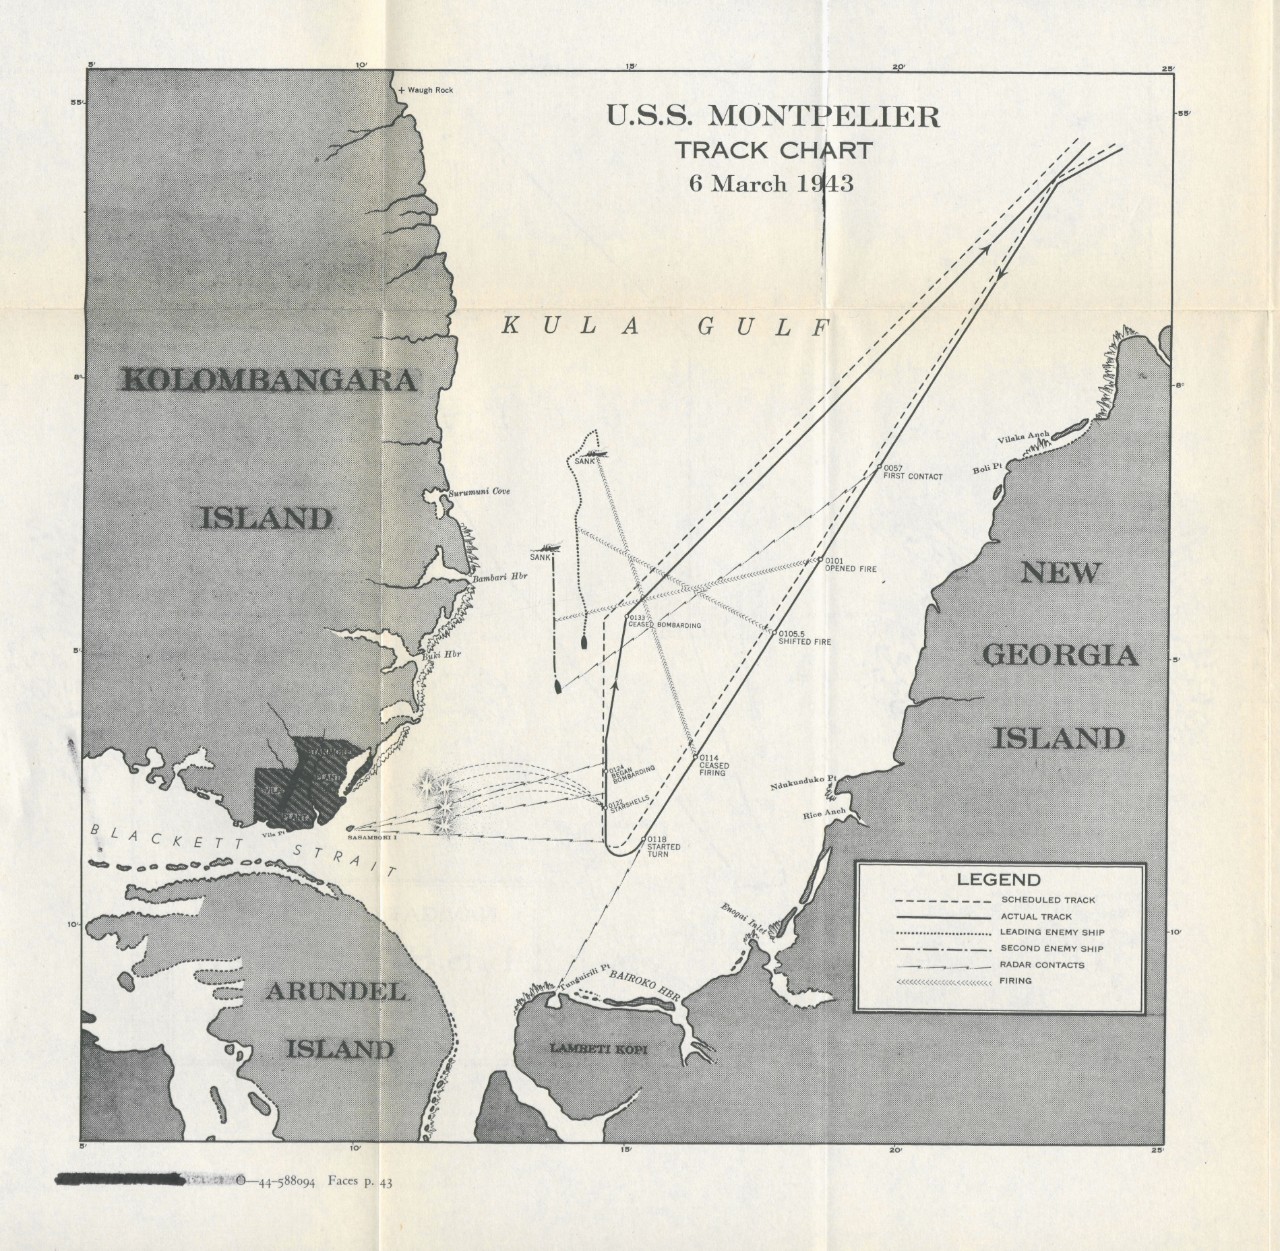 USS Montpelier track chart 6 March 1943